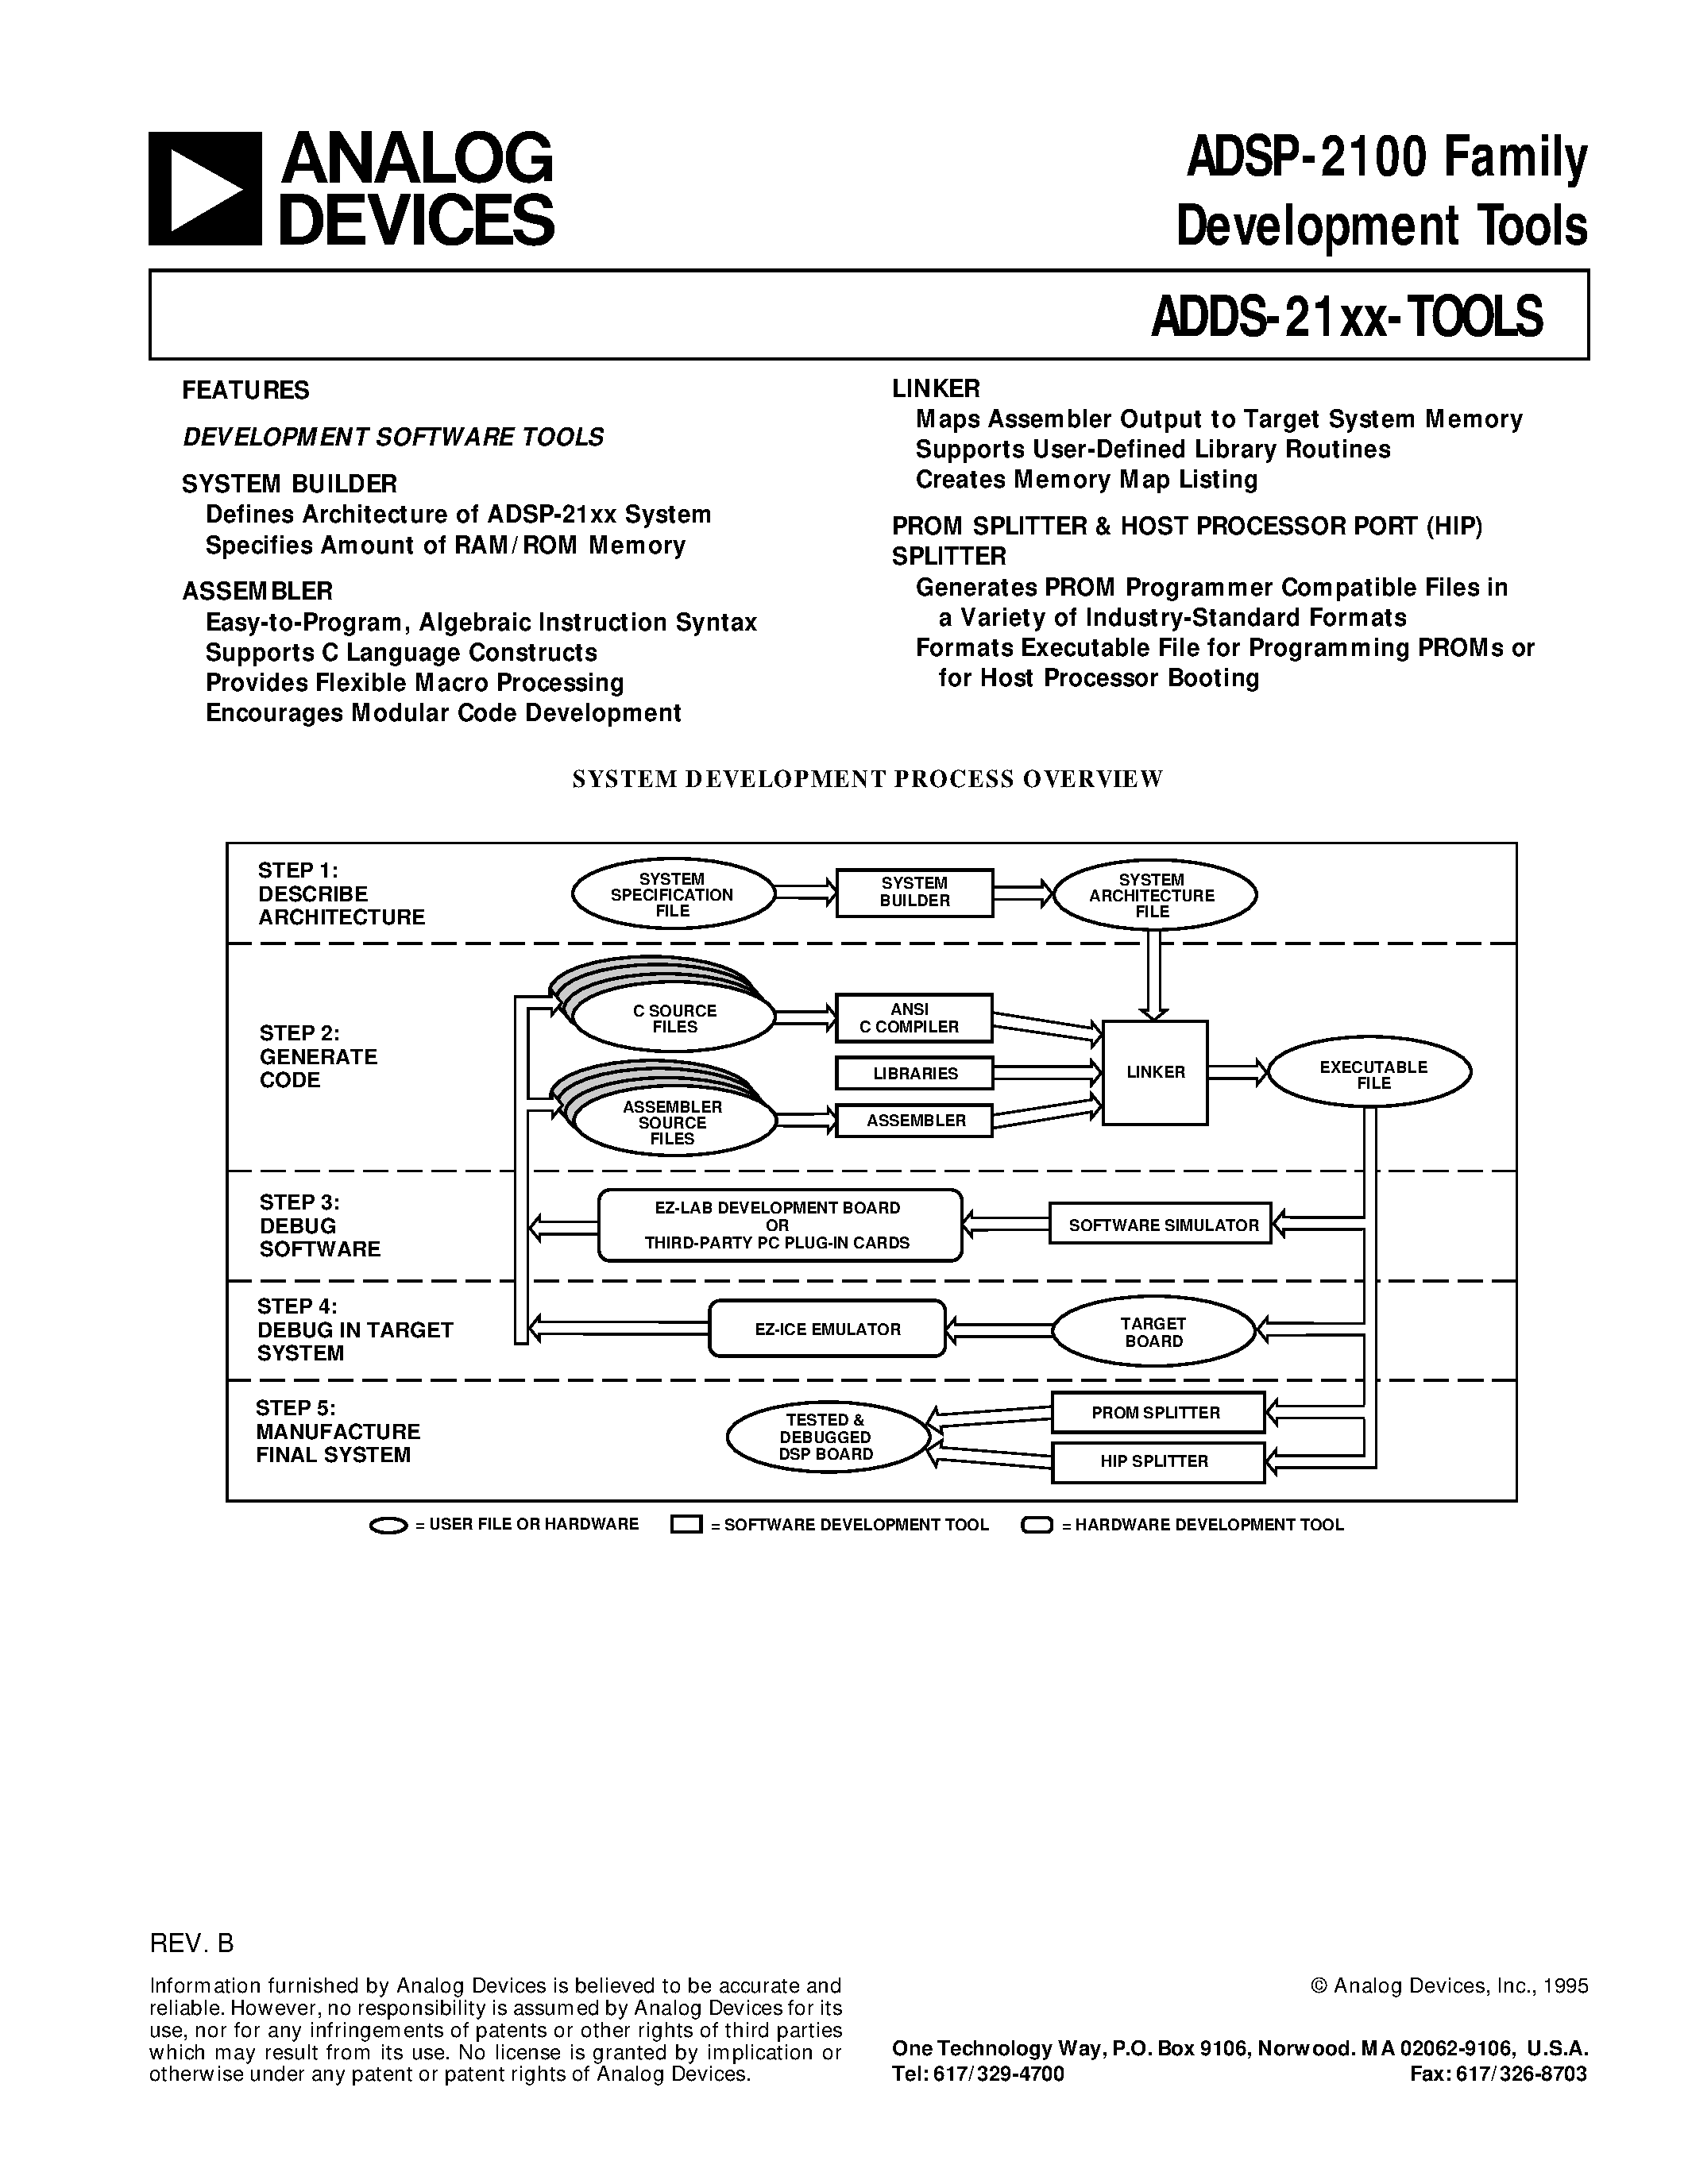 Datasheet ADDS-2171-EZ-ICE - ADSP-2100 Family Development Tools page 1